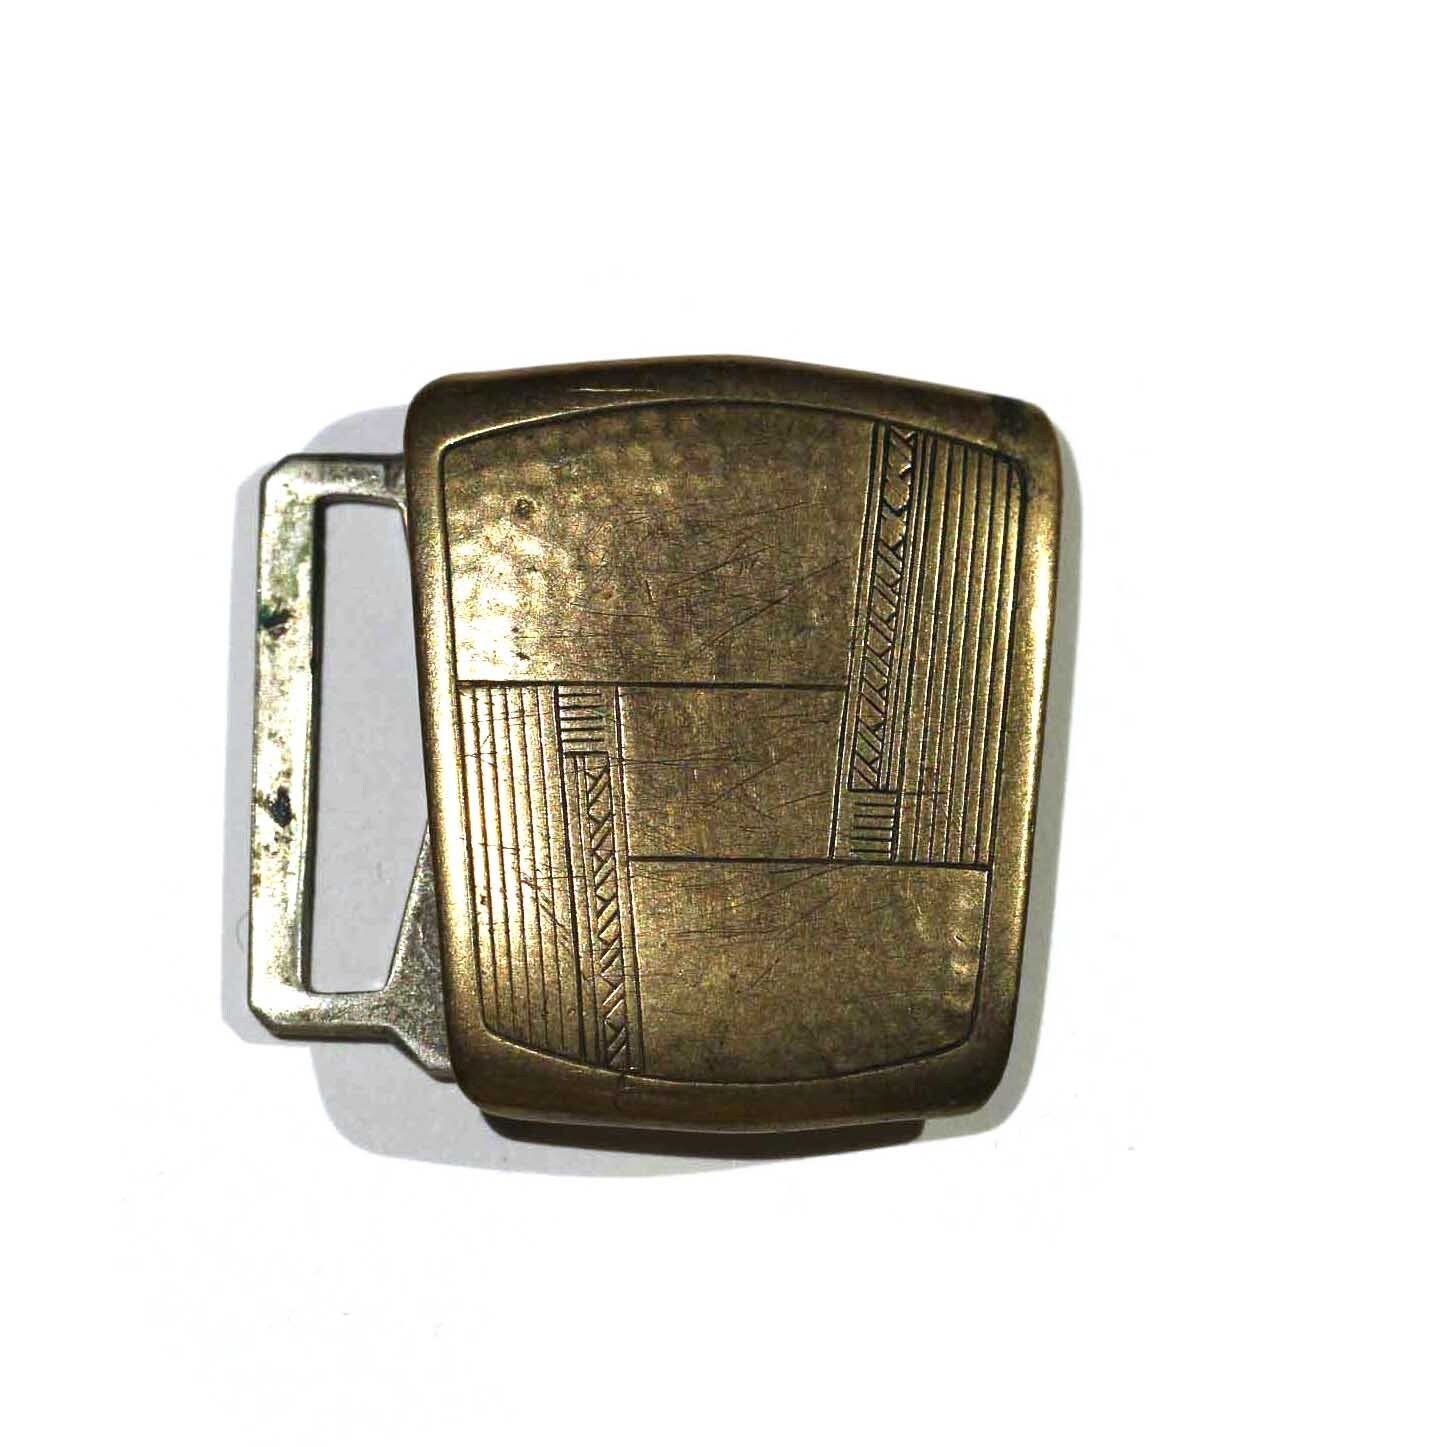 Heavy Retro Solid Brass Pin Belt Buckle Carving Top Thick Designer